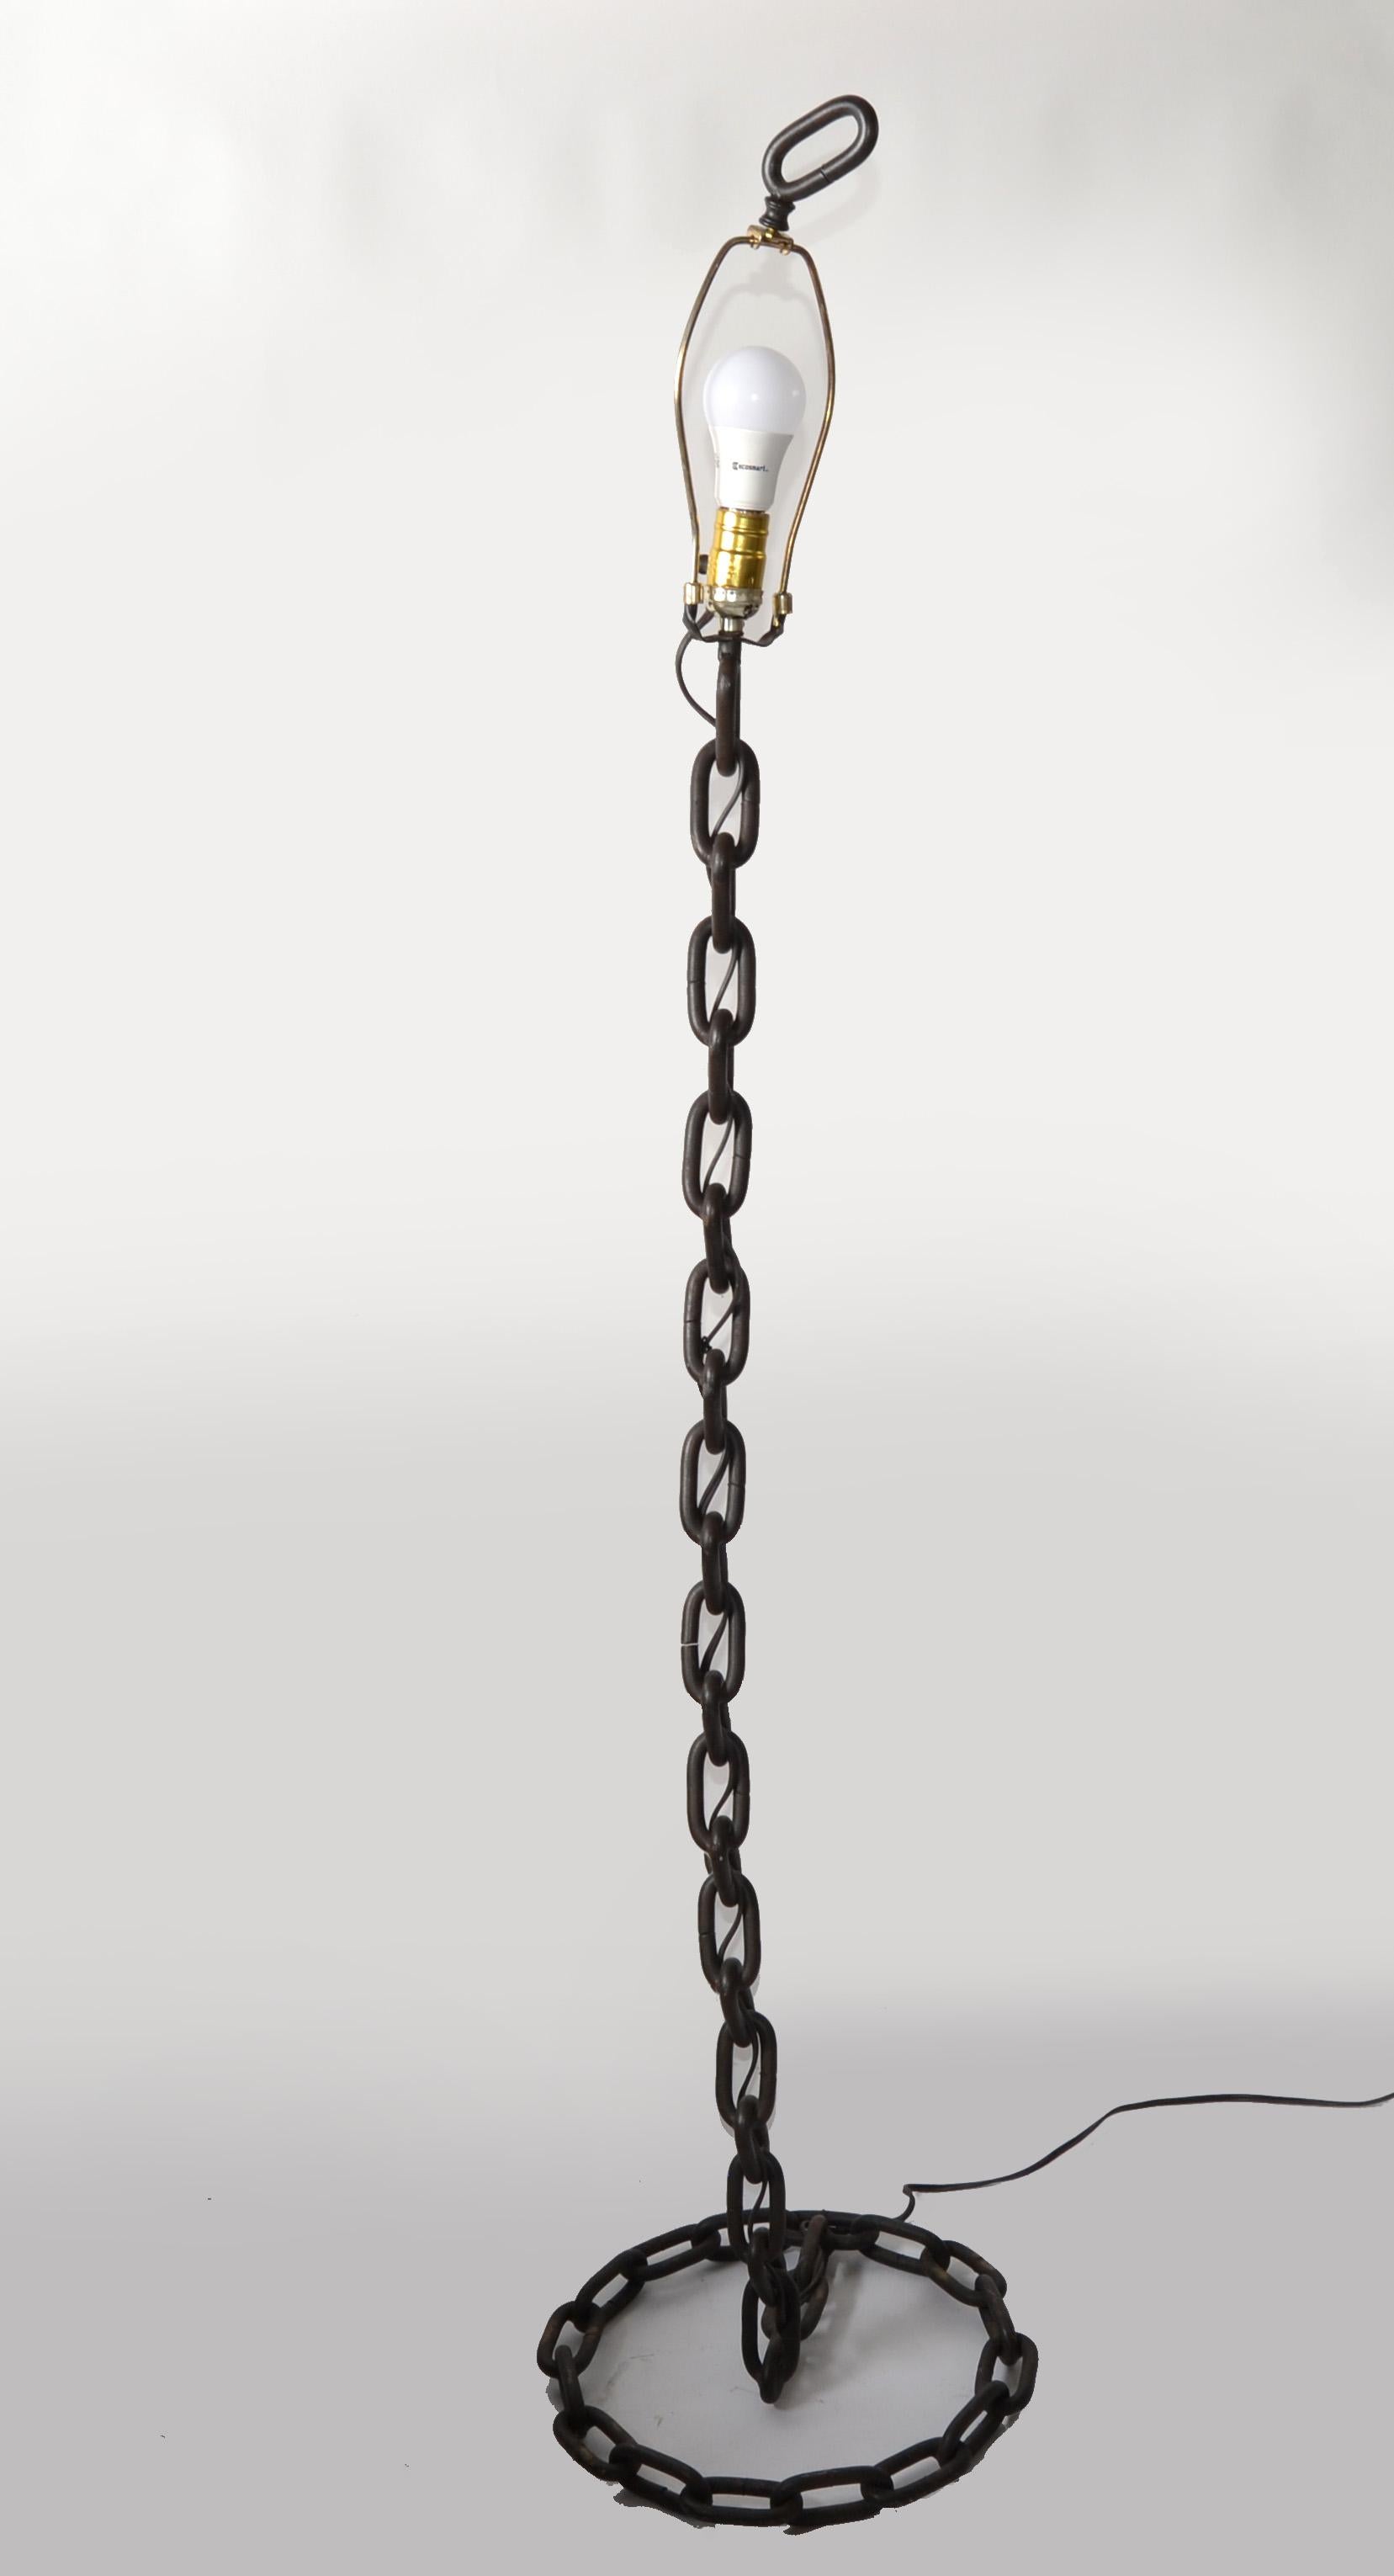 French 5 Feet tall Brutalist rustic welded Iron Chain Link Floor Lamp with Harp and Finial in the Style of Designer Franz West.
Late 20th Design made in France with circular base and welded in matte black, great craftsmanship with coastal, nautical